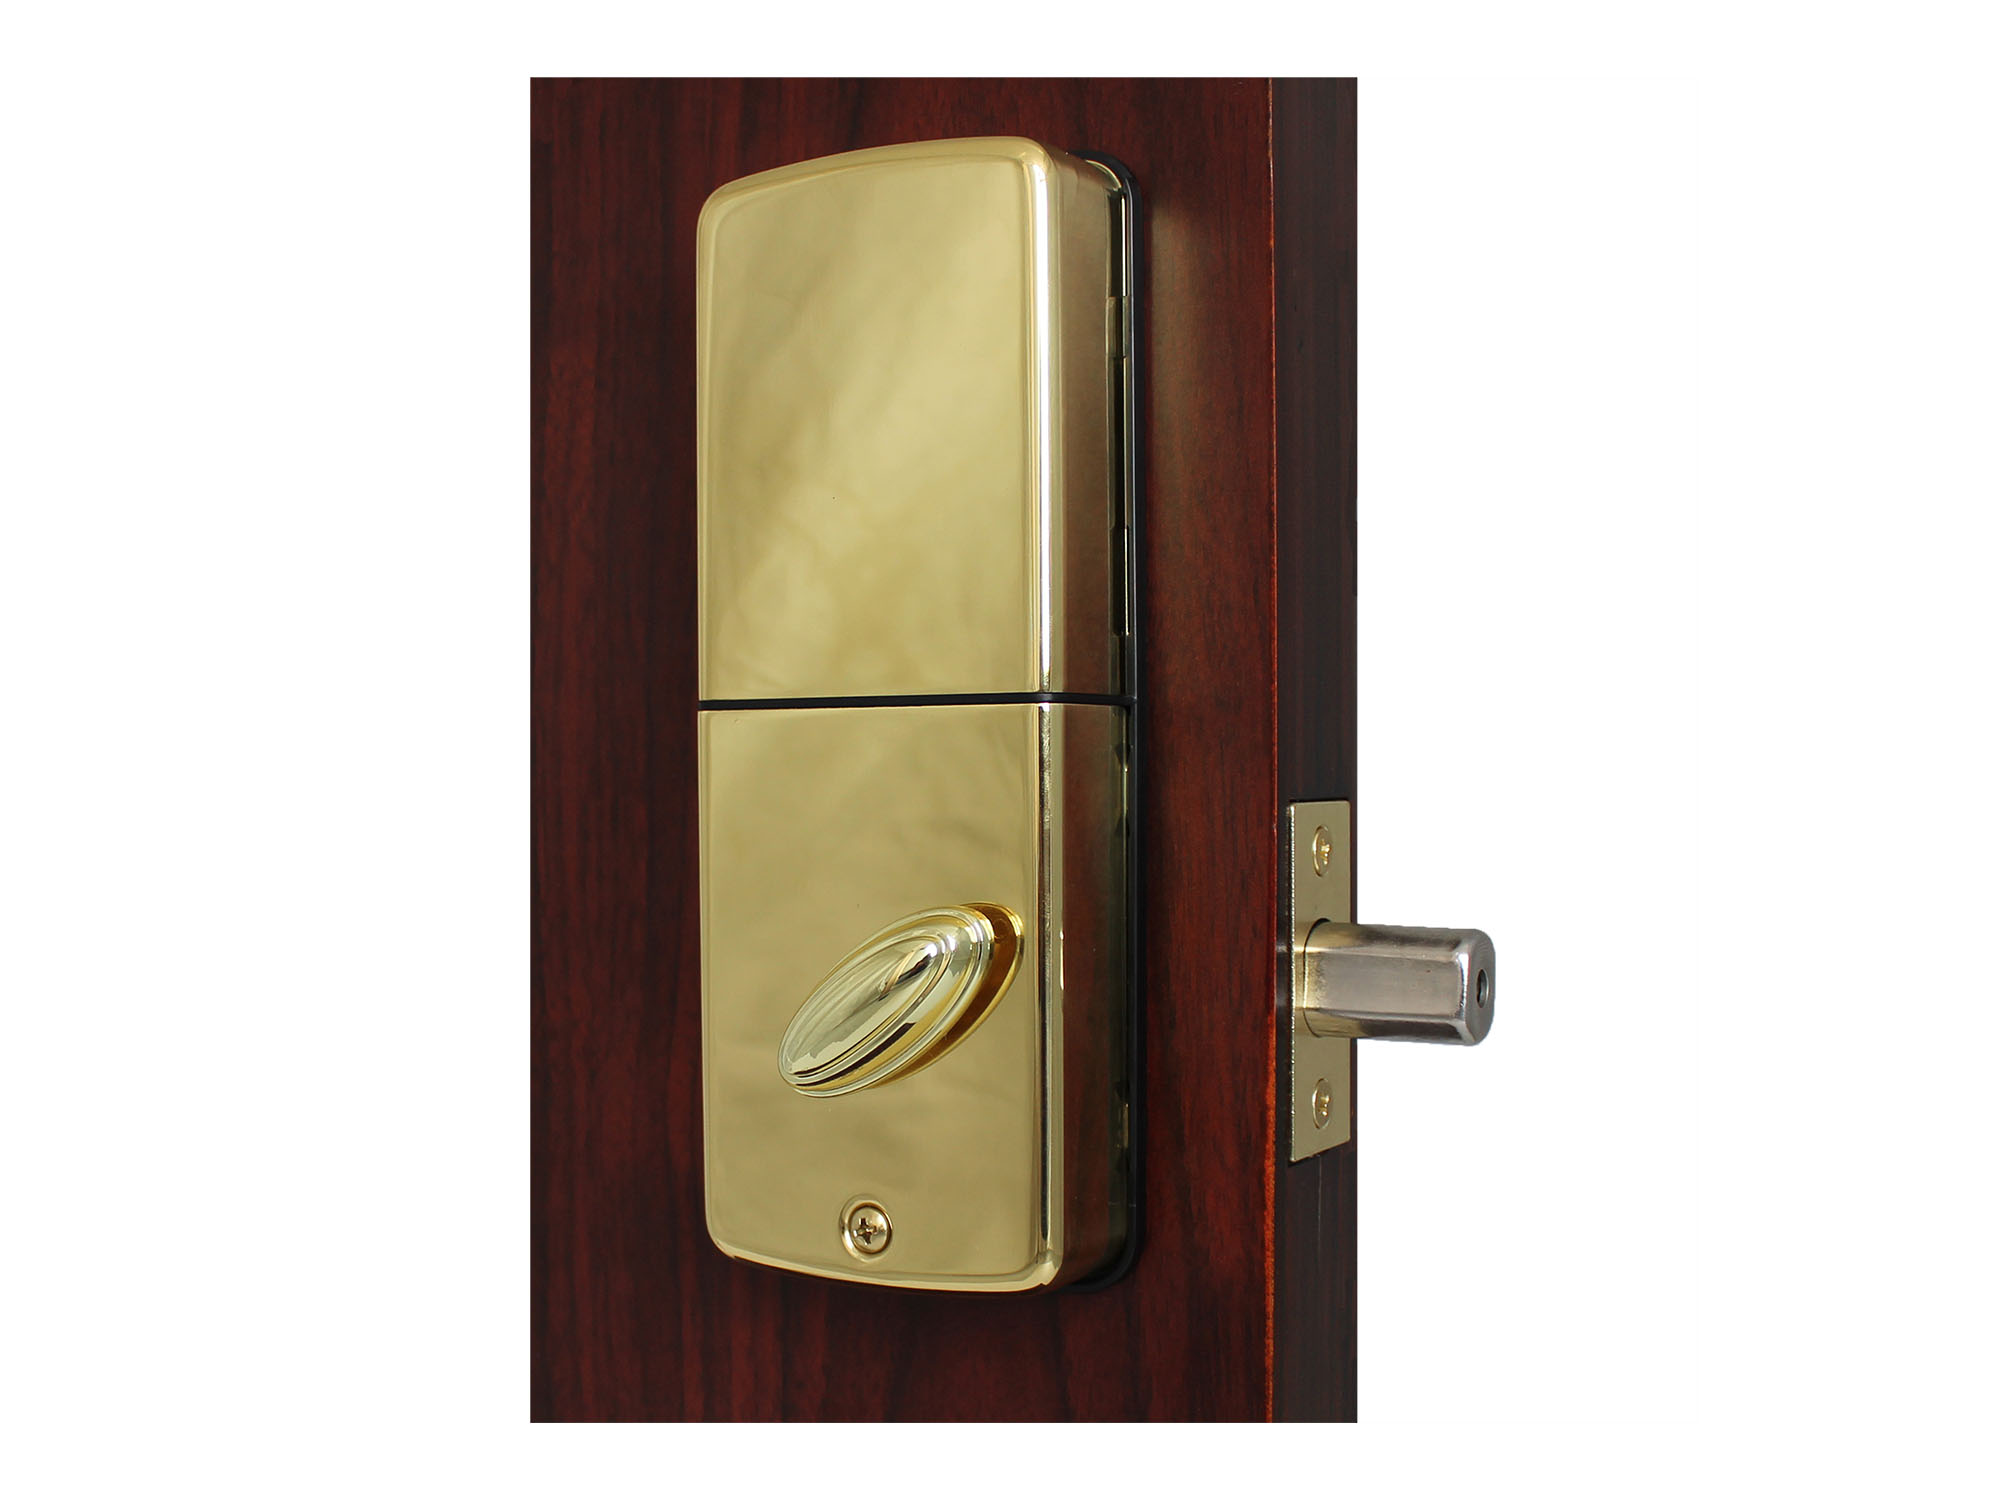 Lockey E915 Electronic Deadbolt Lock with Lighted Keypad (E910 replacement)